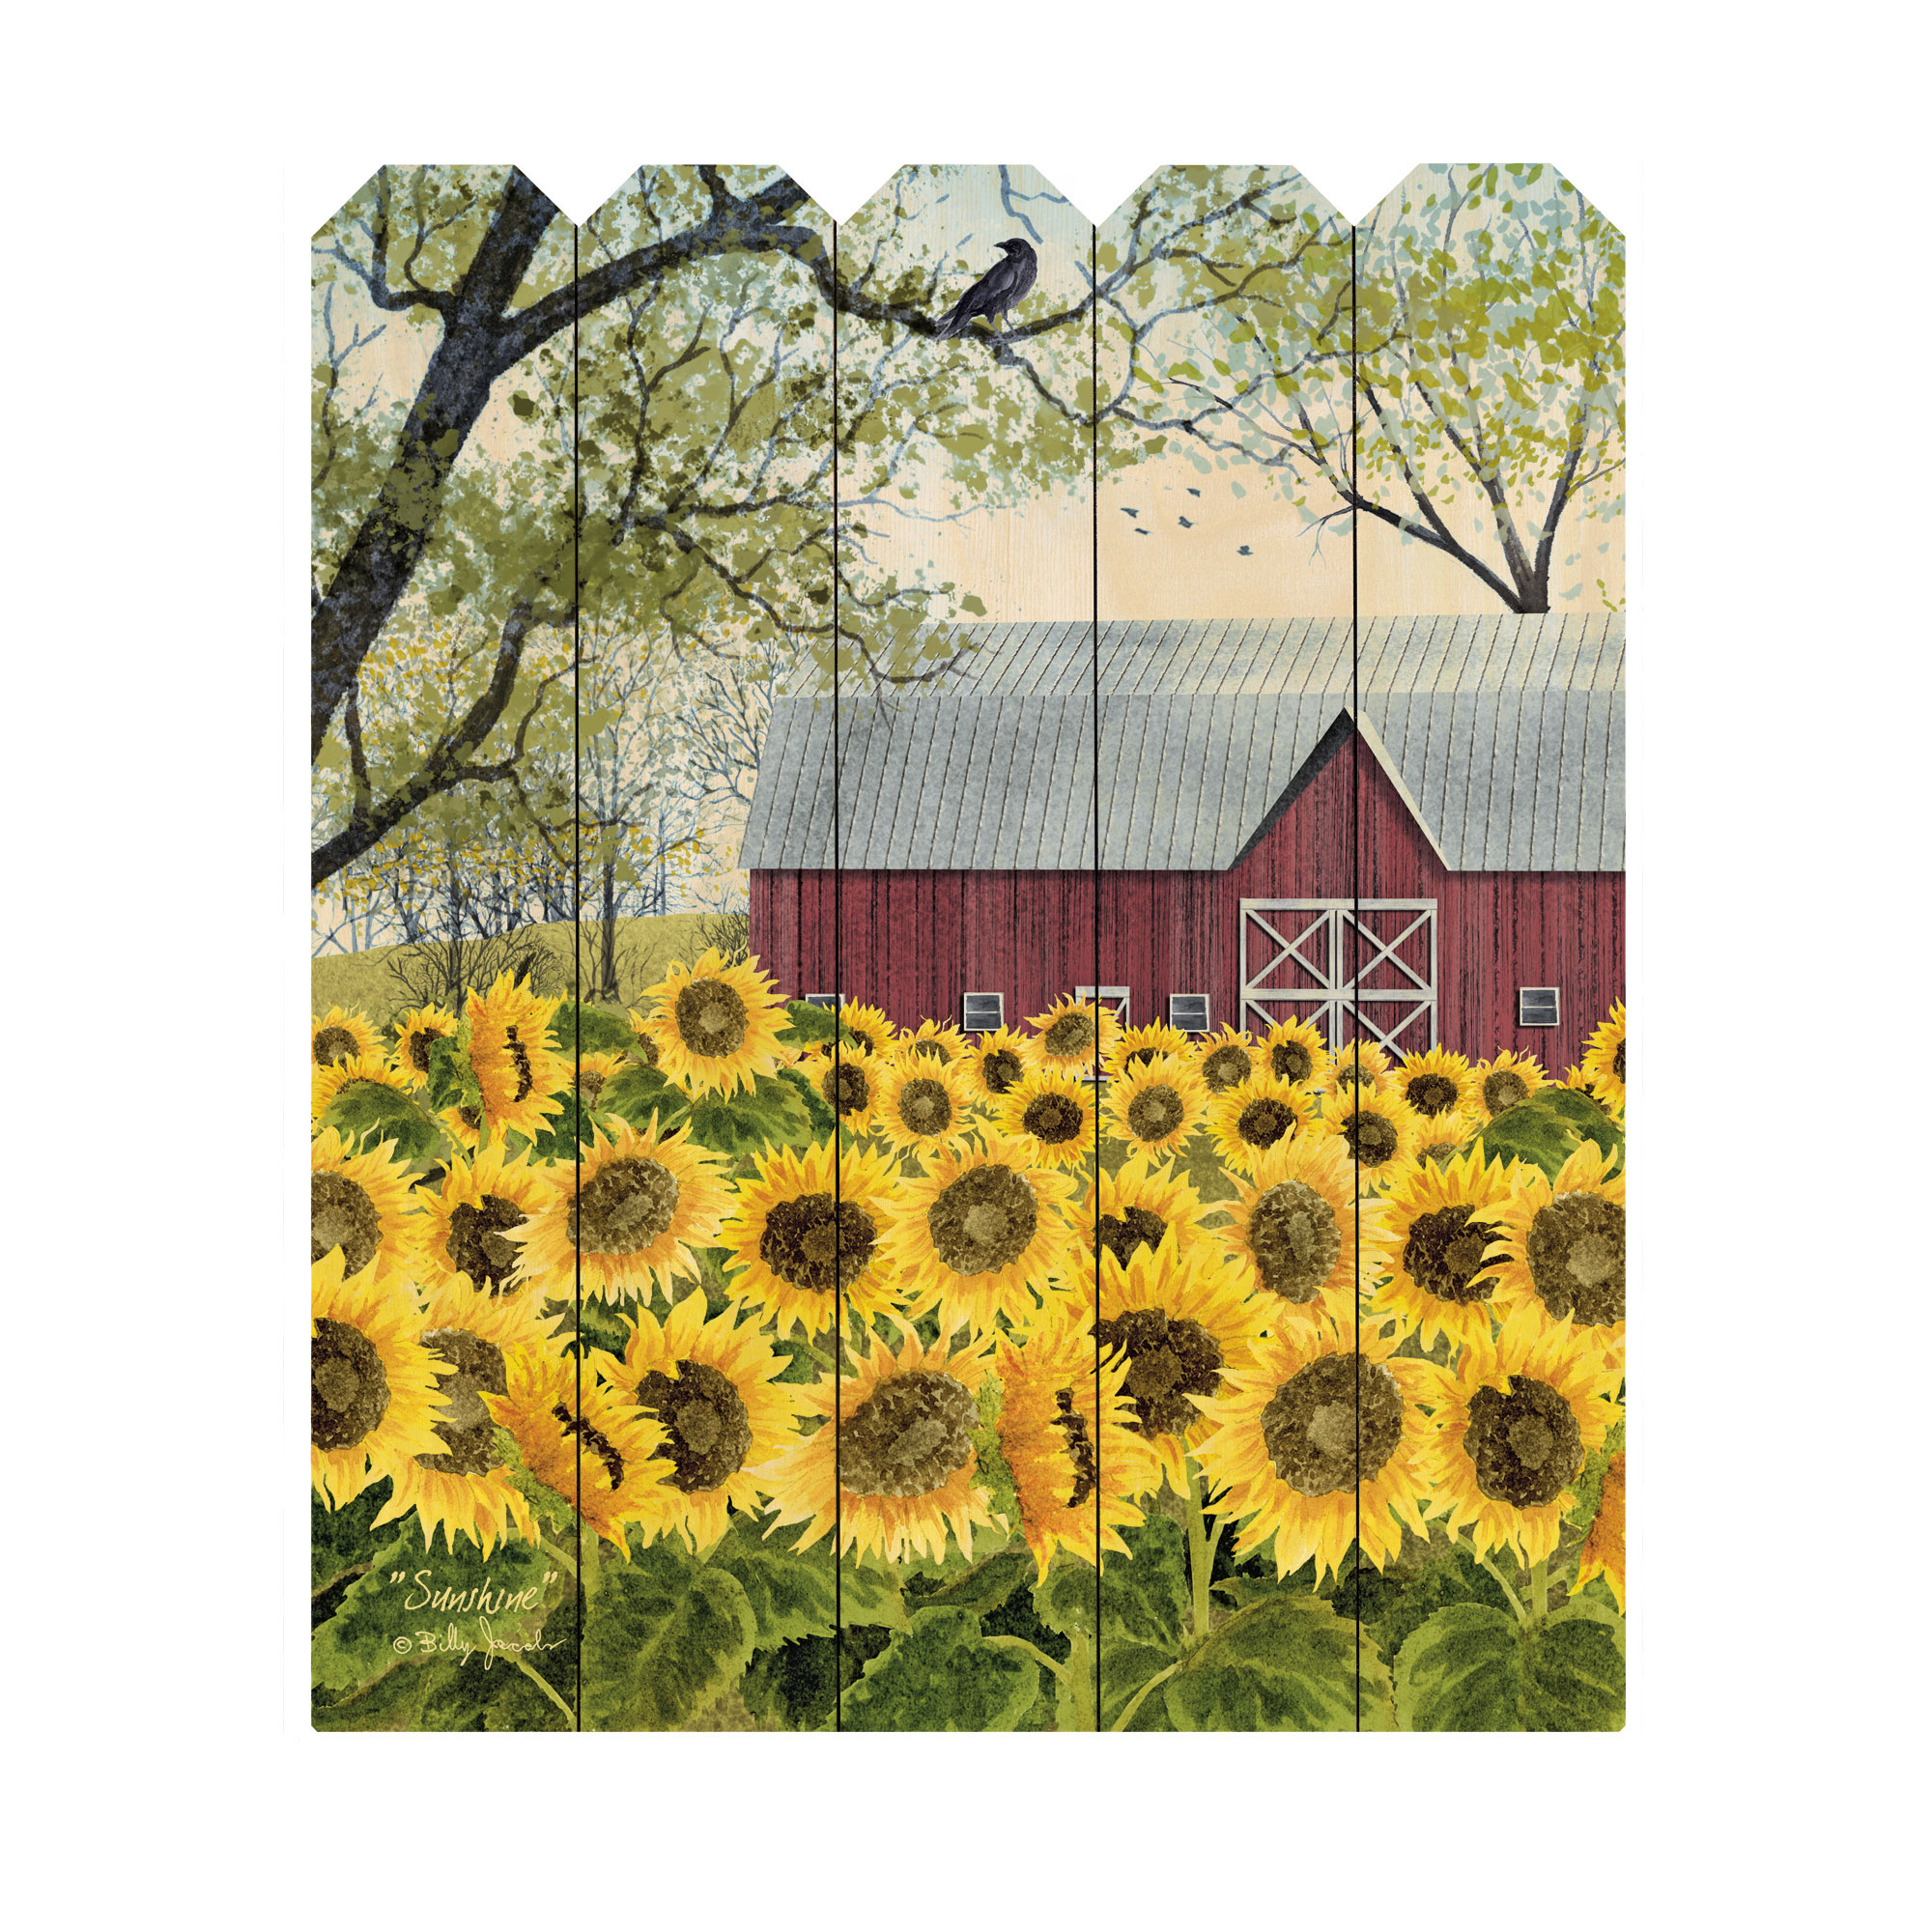 "Sunshine" By Artisan Billy Jacobs, Printed on Wooden Picket Fence Wall Art